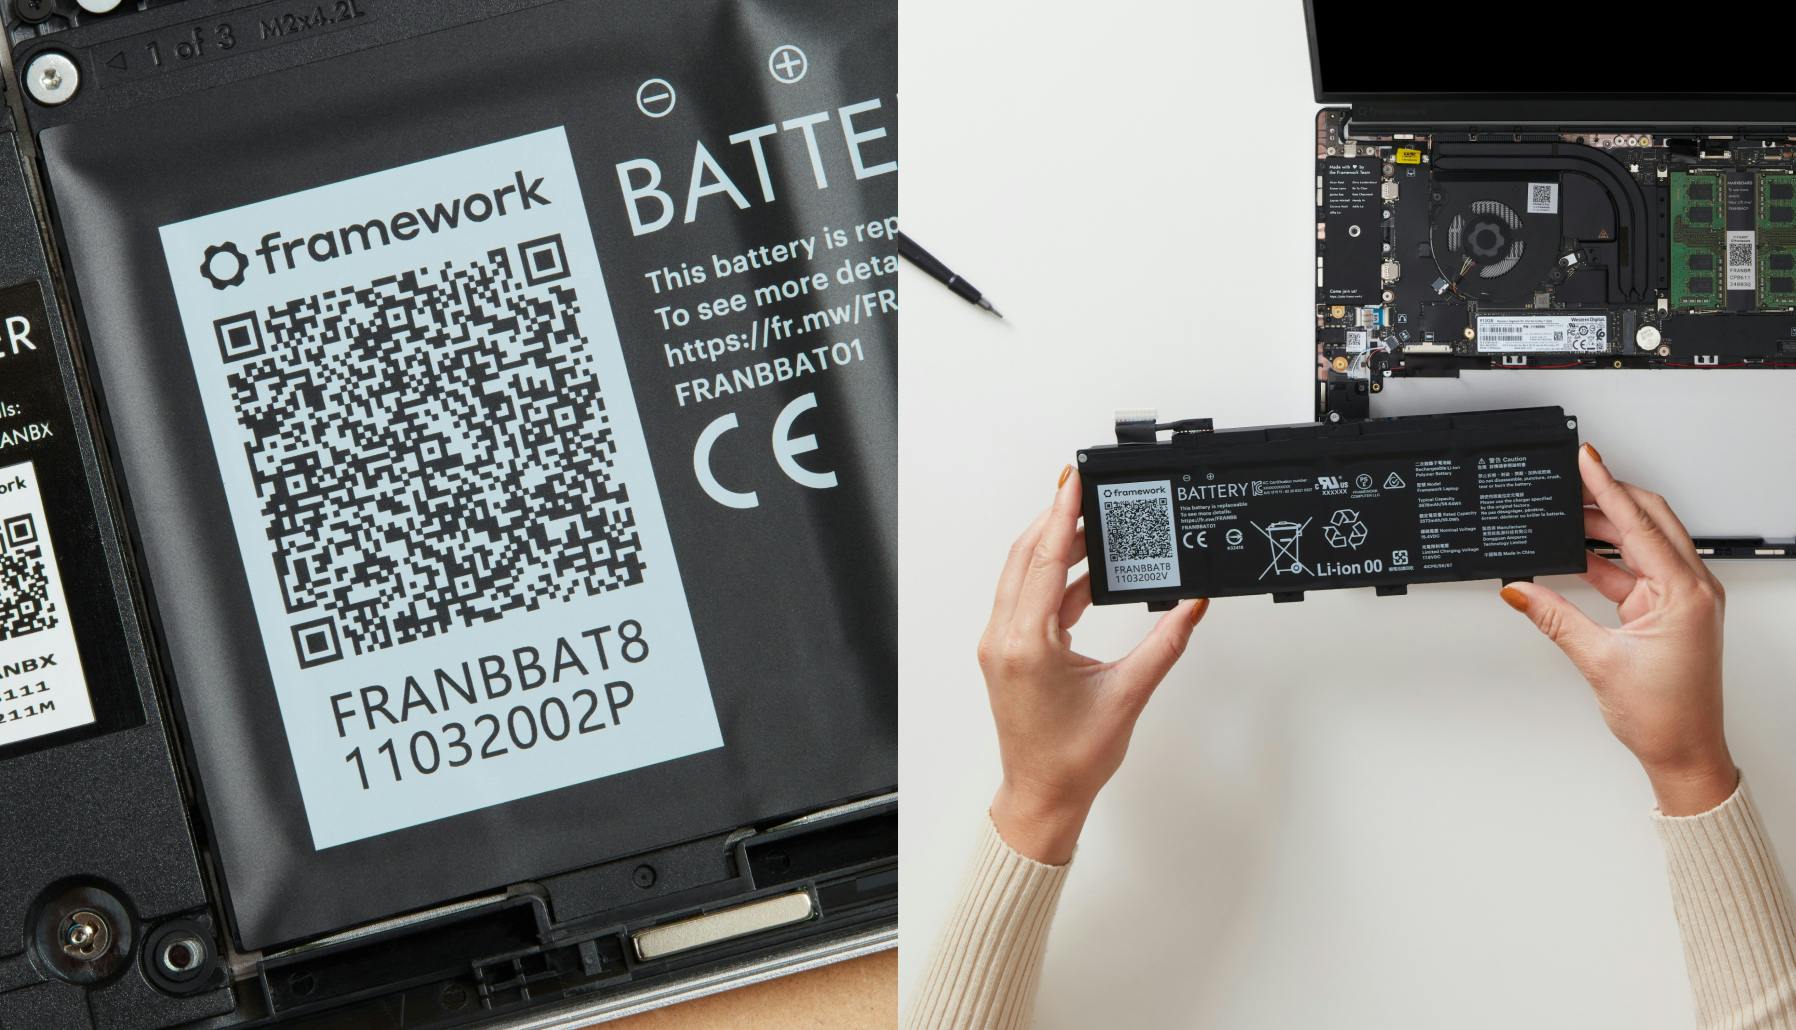 Split image. Left image shows a close-up of a QR code on the battery. Right image shows someone installing the battery into the Framework laptop.